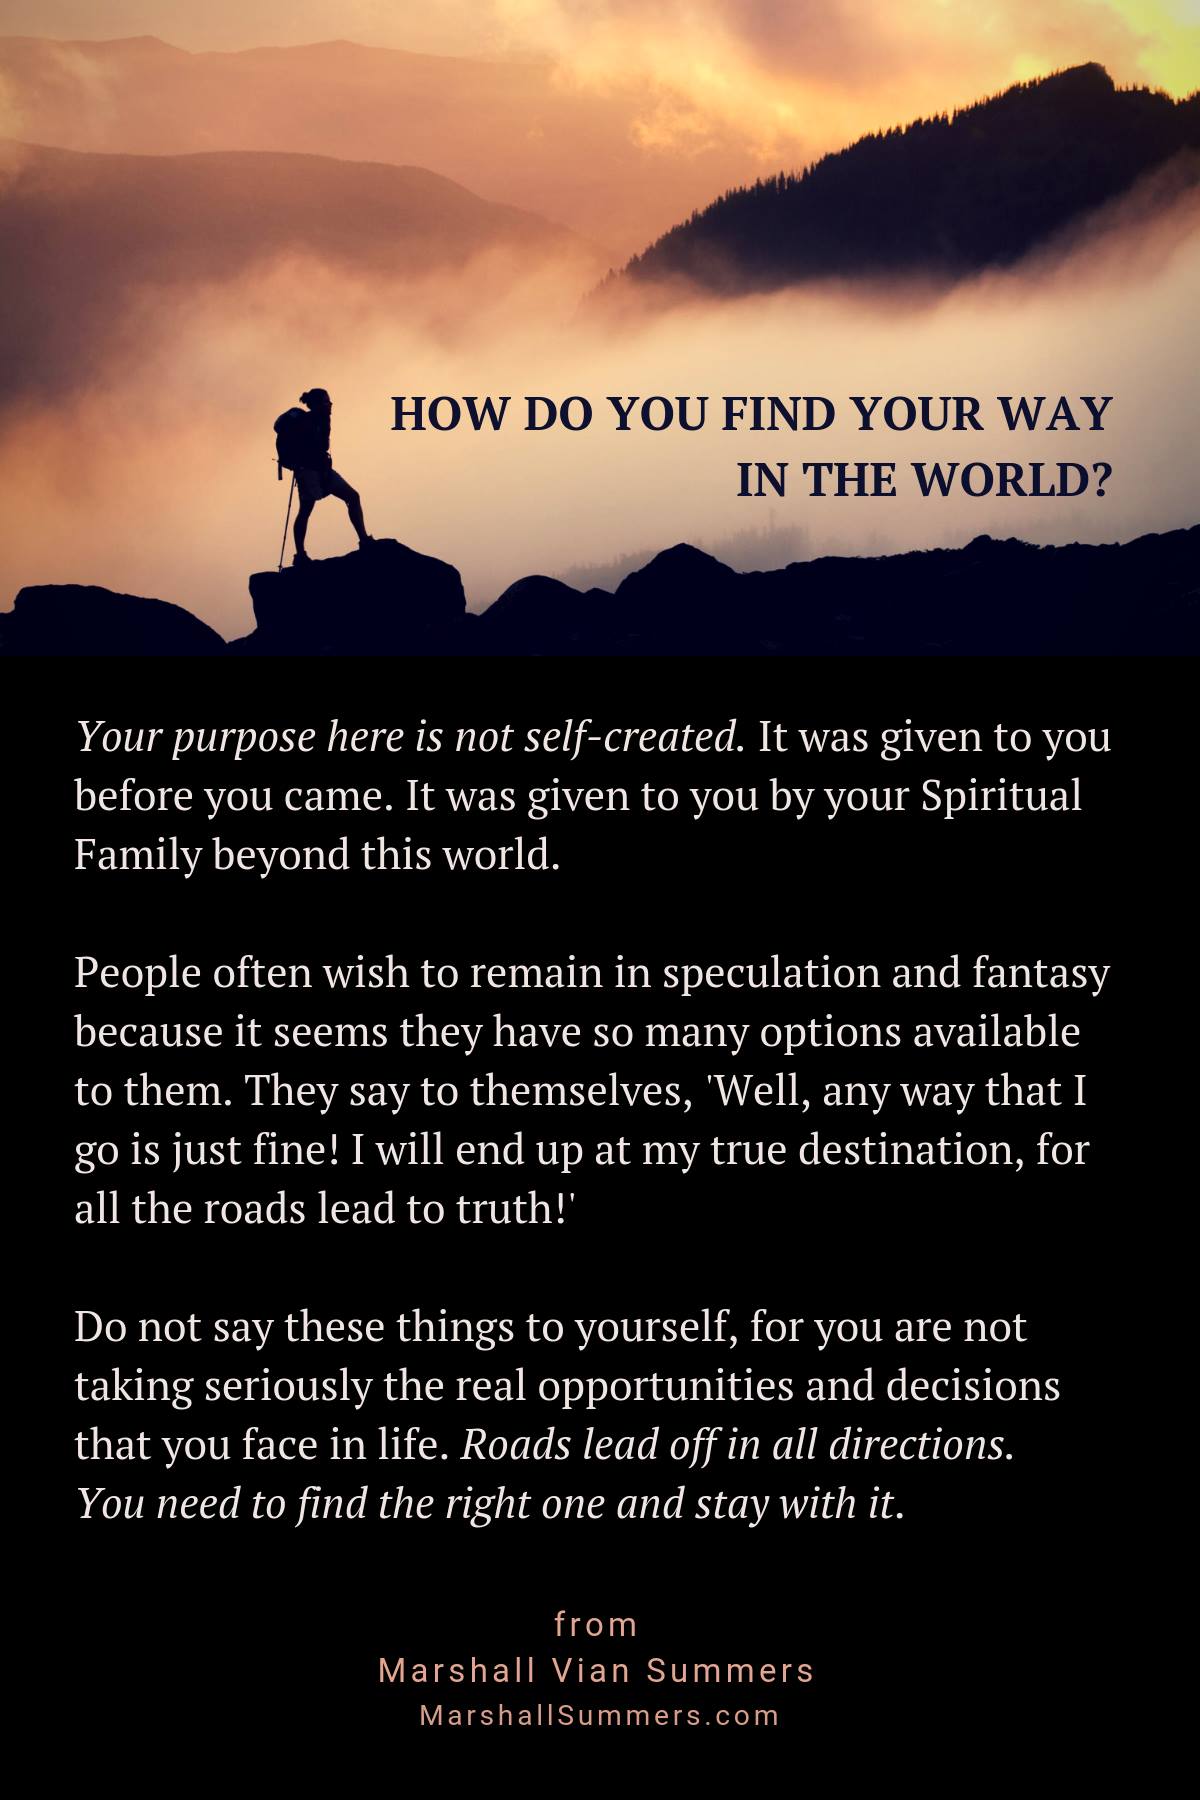 How to find your Way in the World